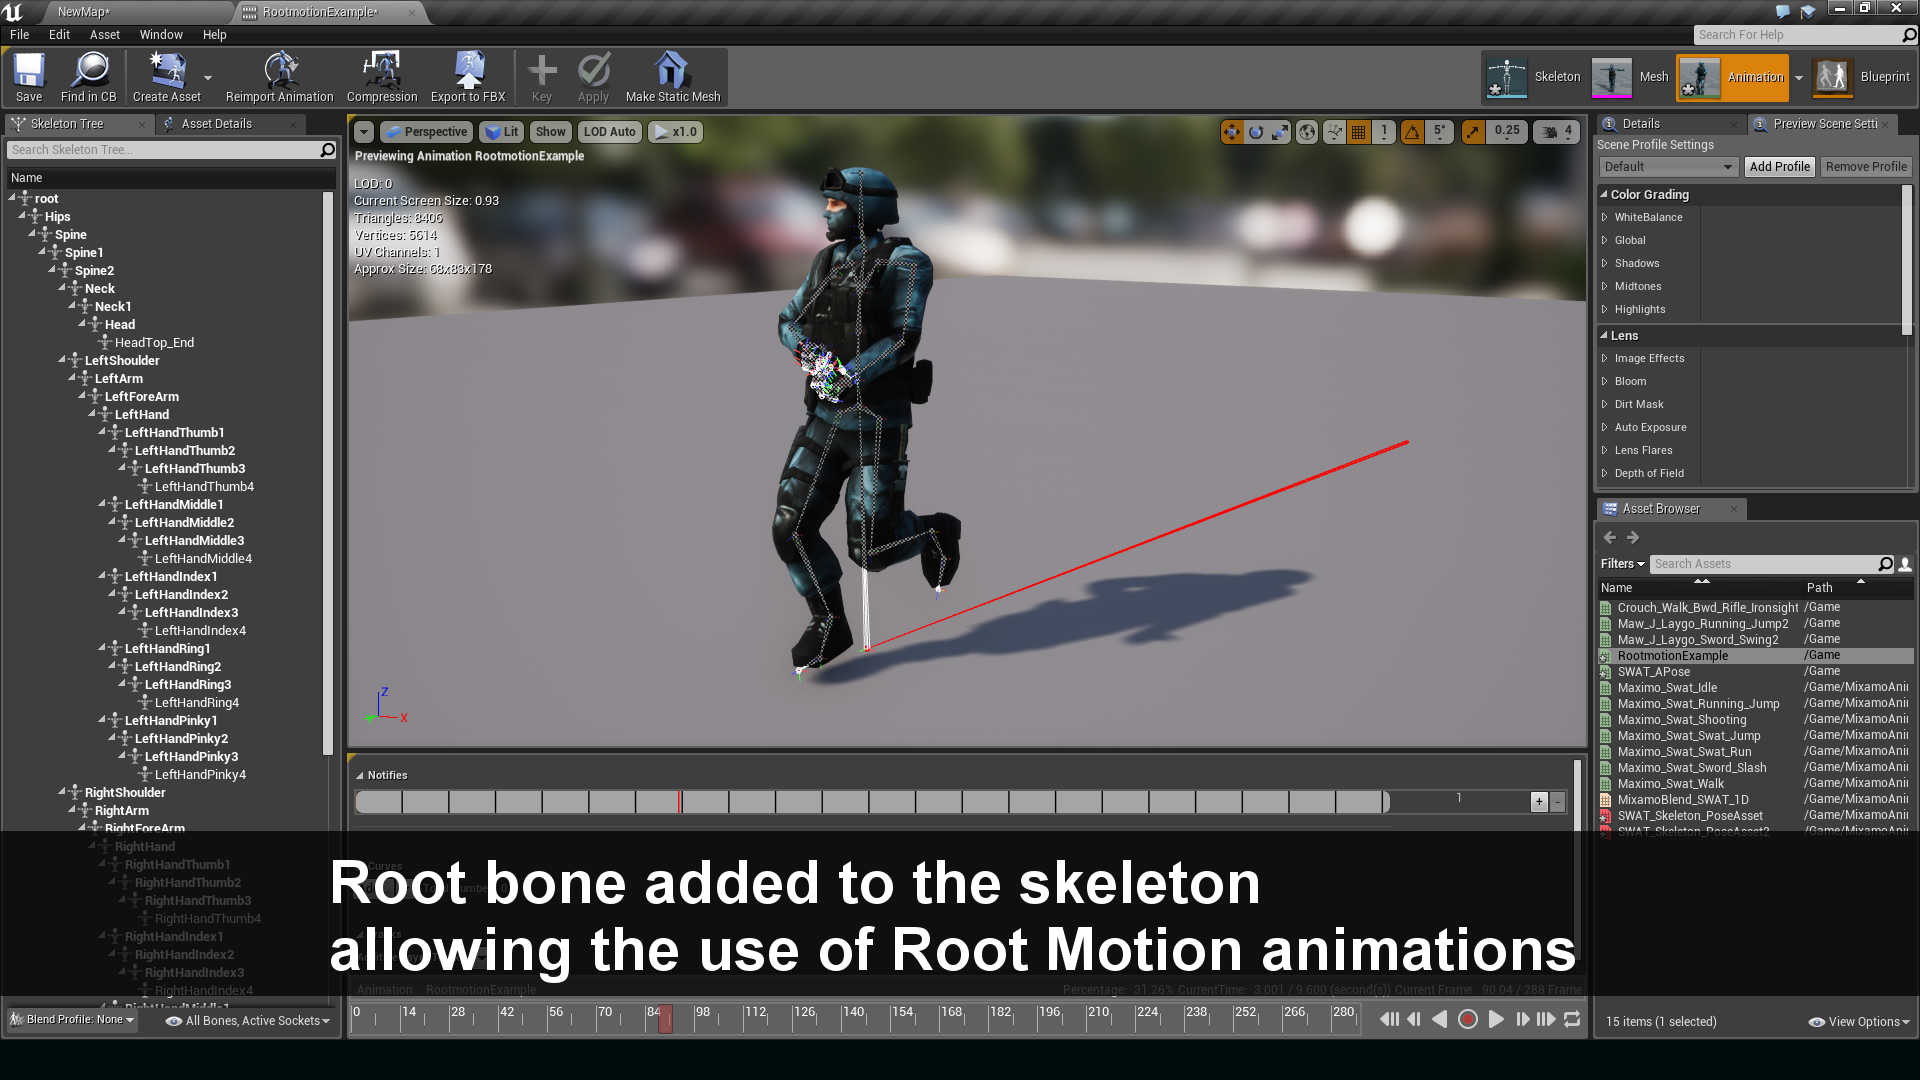 Root bone added to the skeleton allowing the use of Root Motion animations